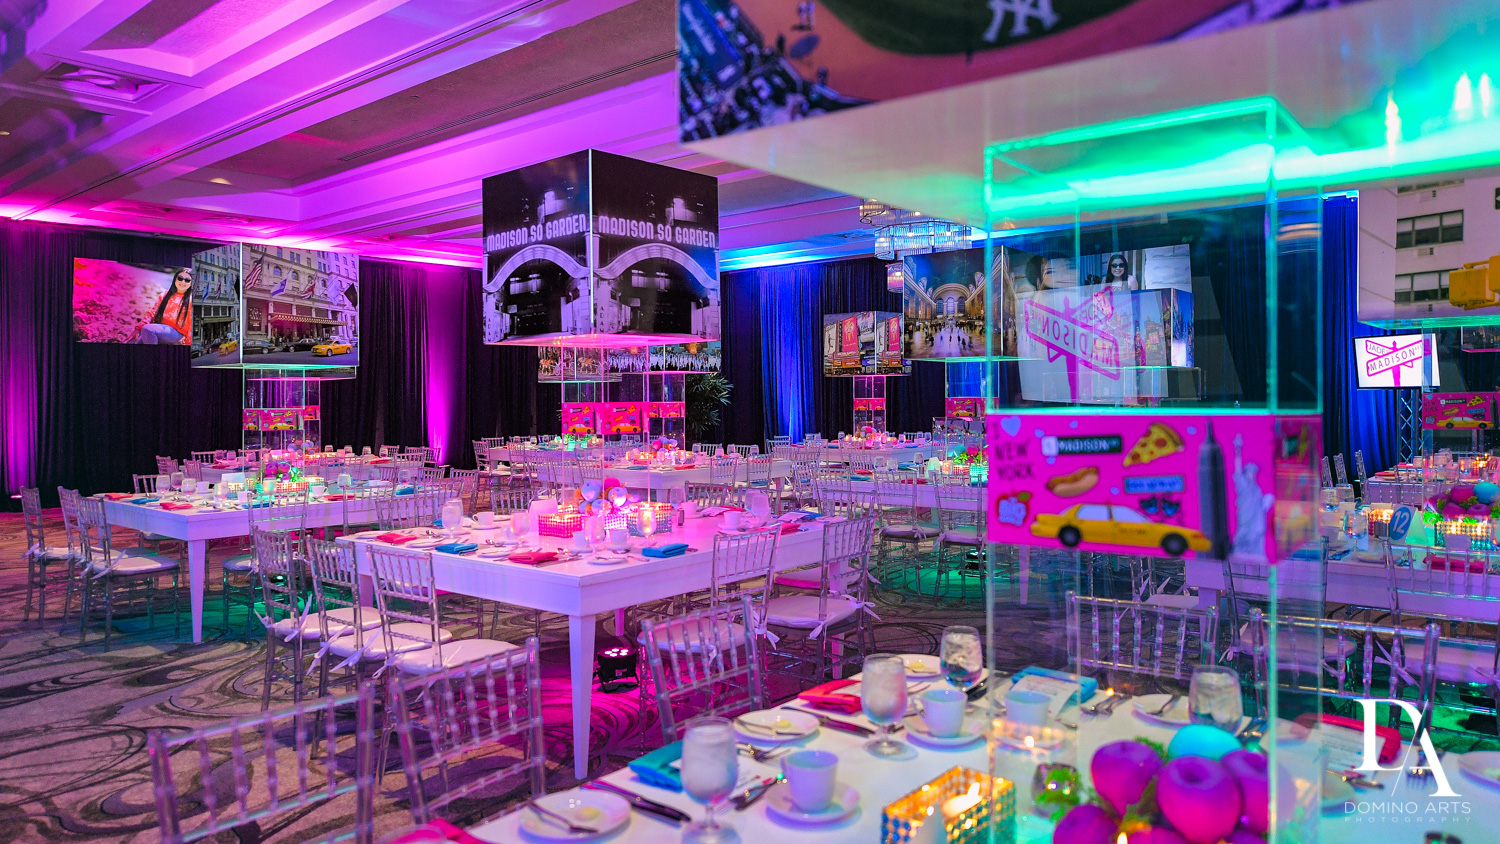 decor at New York Theme Bat Mitzvah at Woodfield Country Club, Boca Raton by Domino Arts Photography